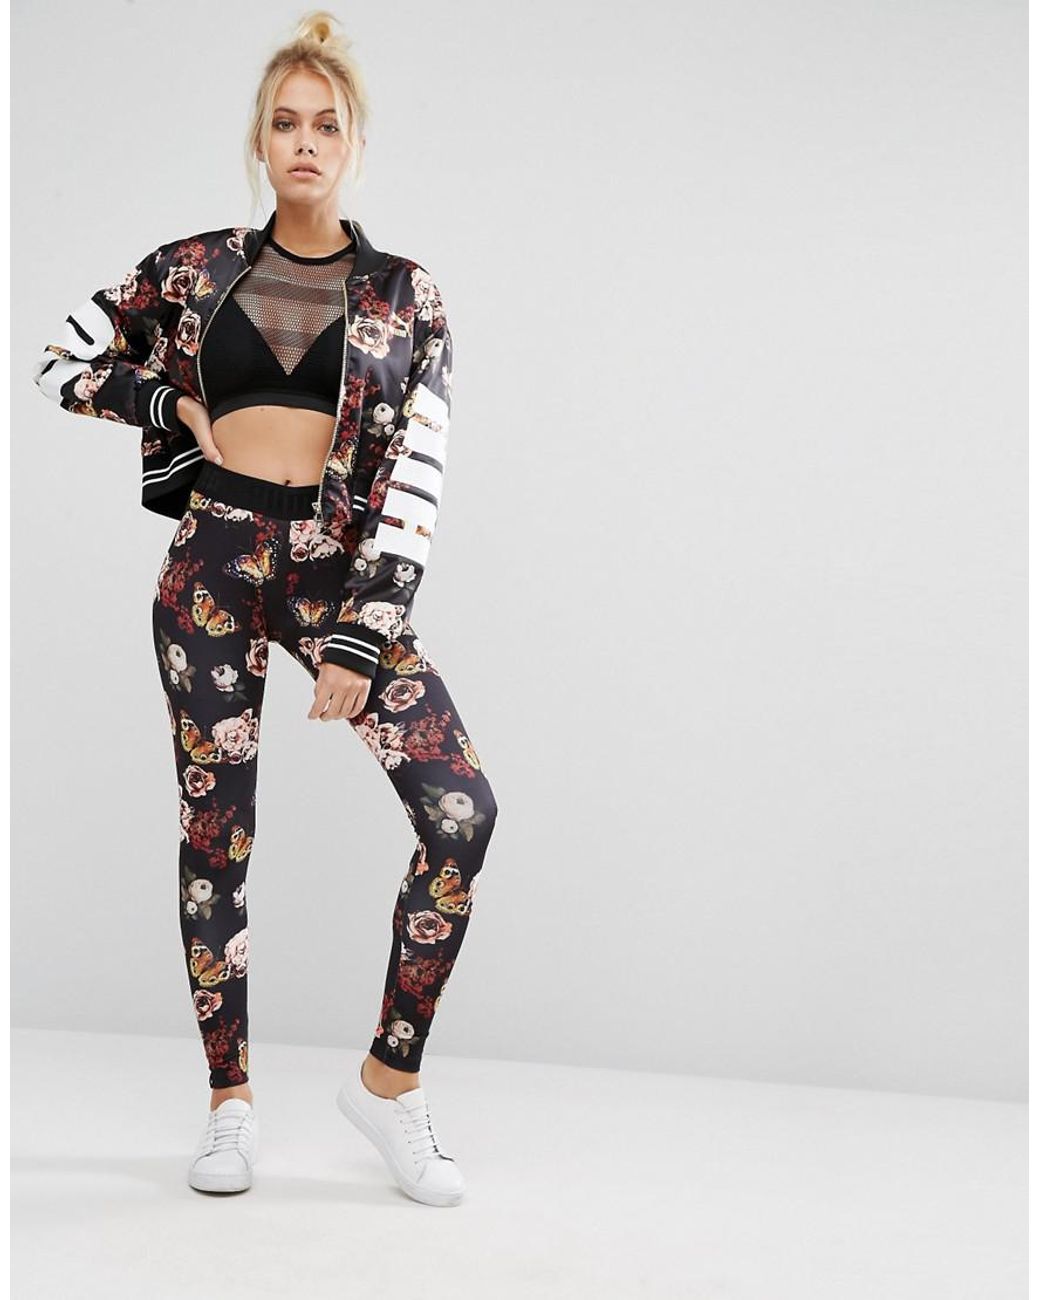 PUMA Exclusive To Asos Floral Print Bomber Jacket in Black | Lyst